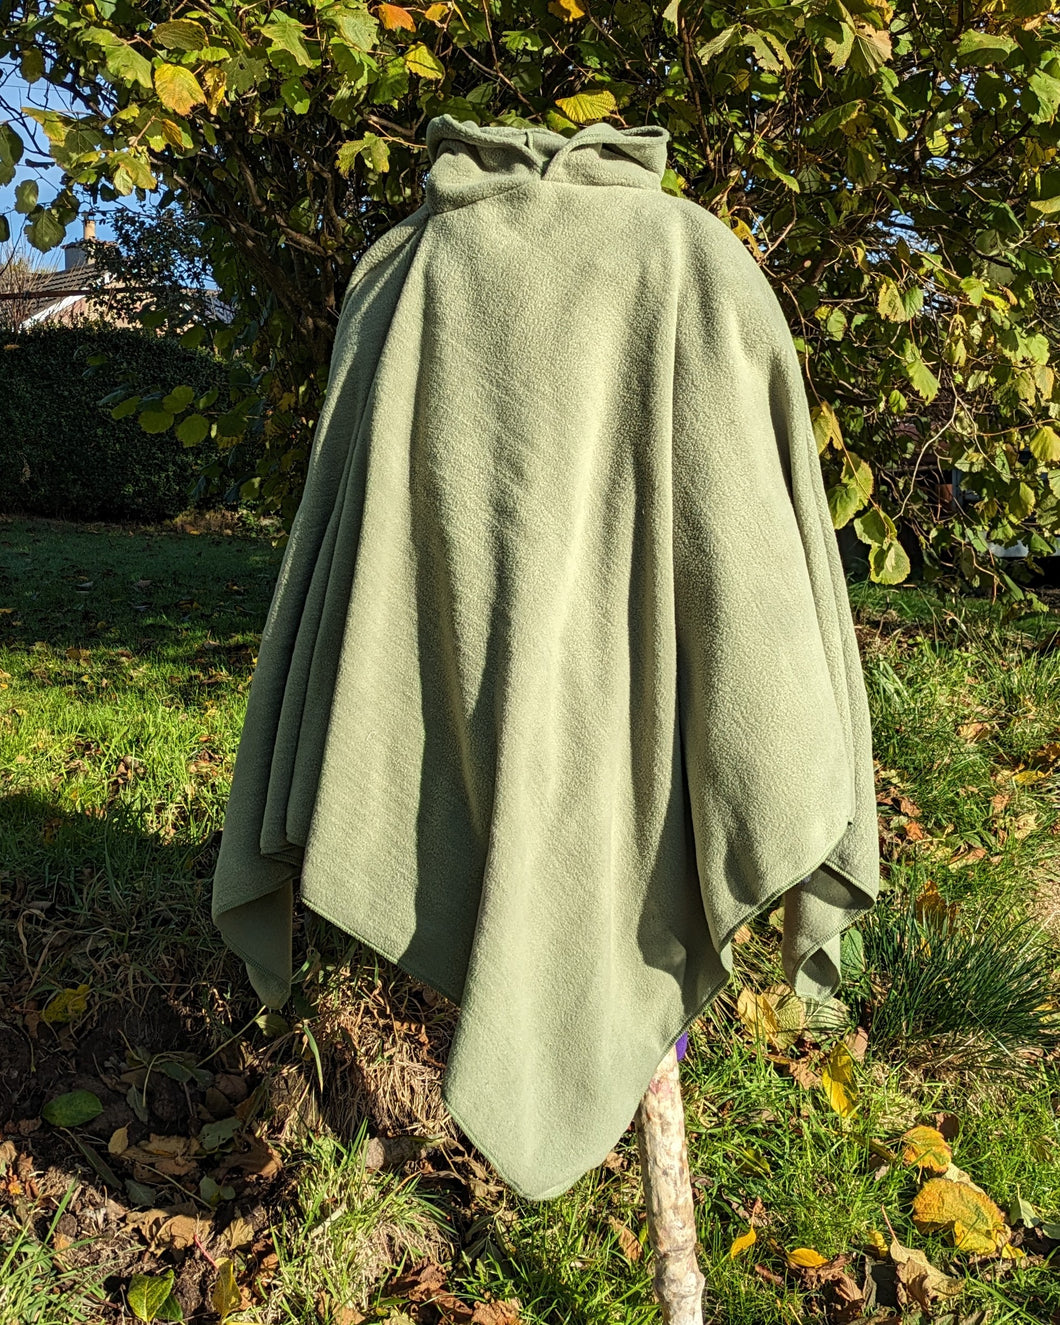 Grown up's camp blanket poncho